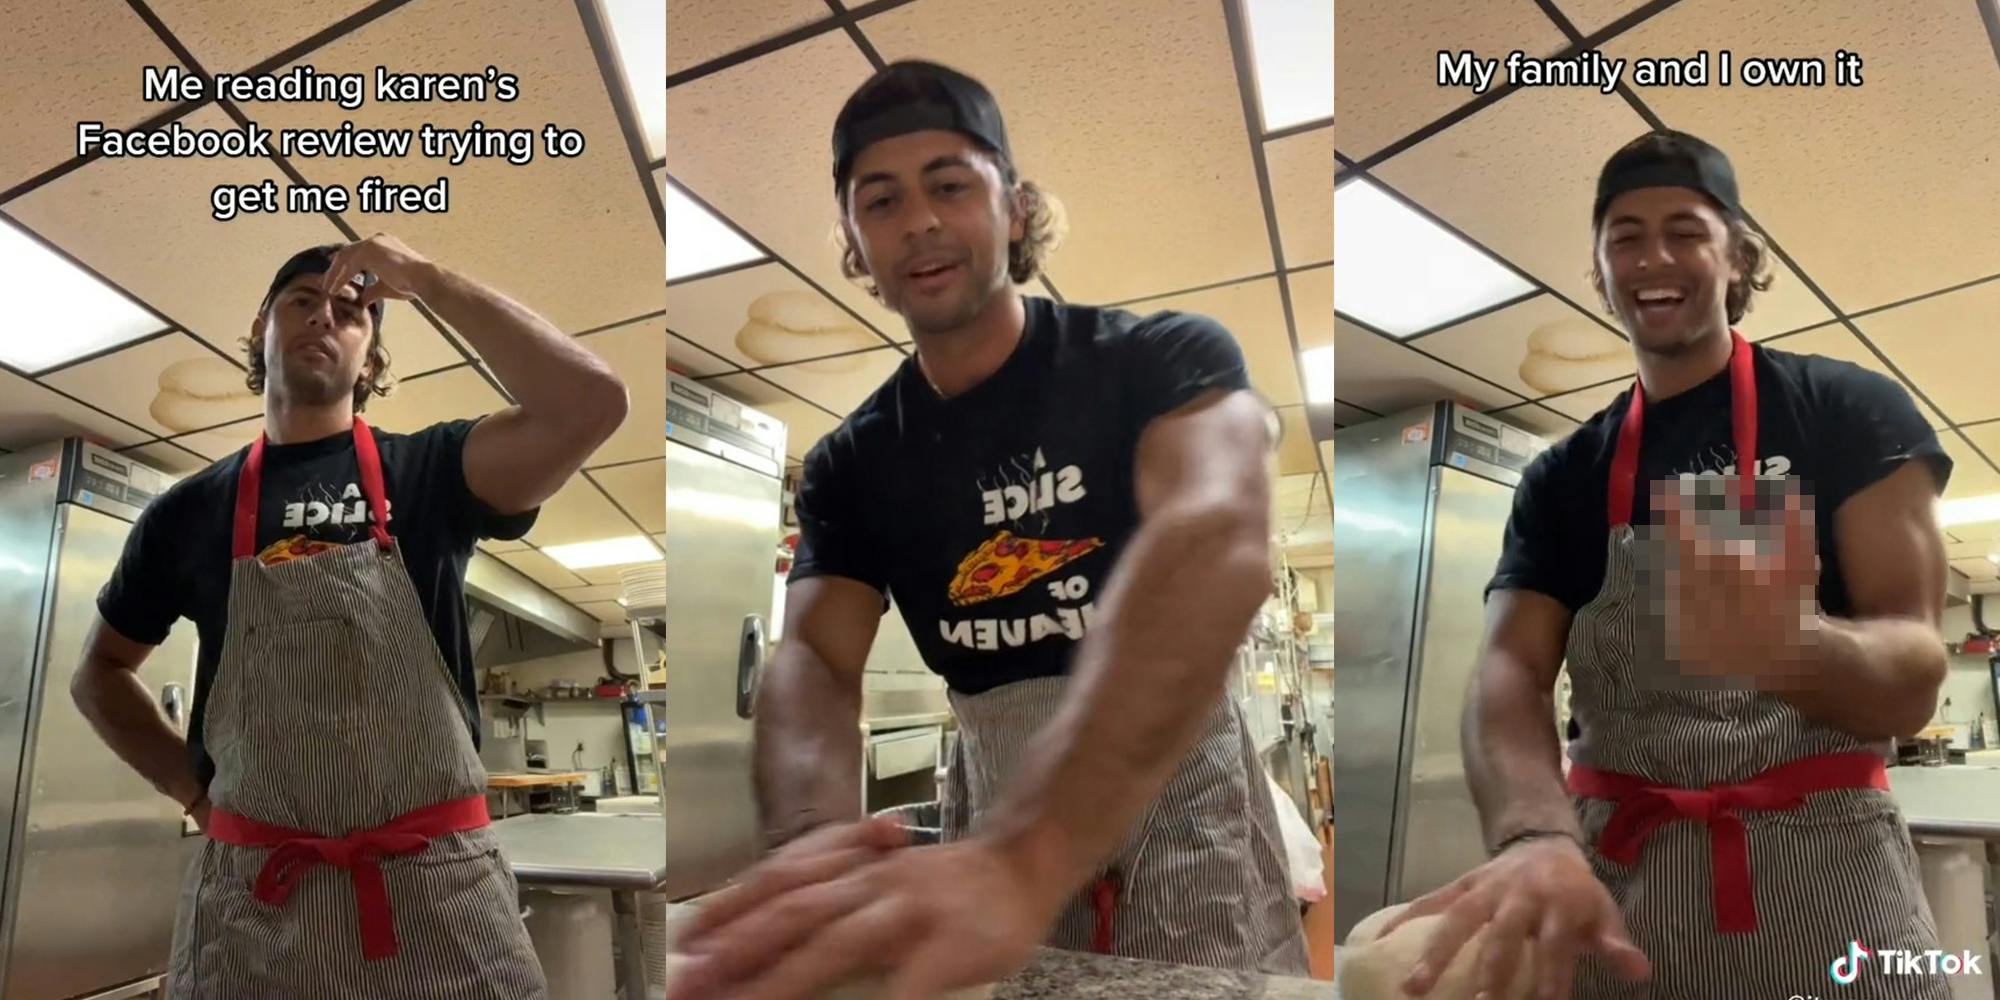 ‘I’M NOT LEAVVINNNN’: Worker puts ‘Karen’ on blast after she tries to get him fired from his family’s restaurant through Facebook review